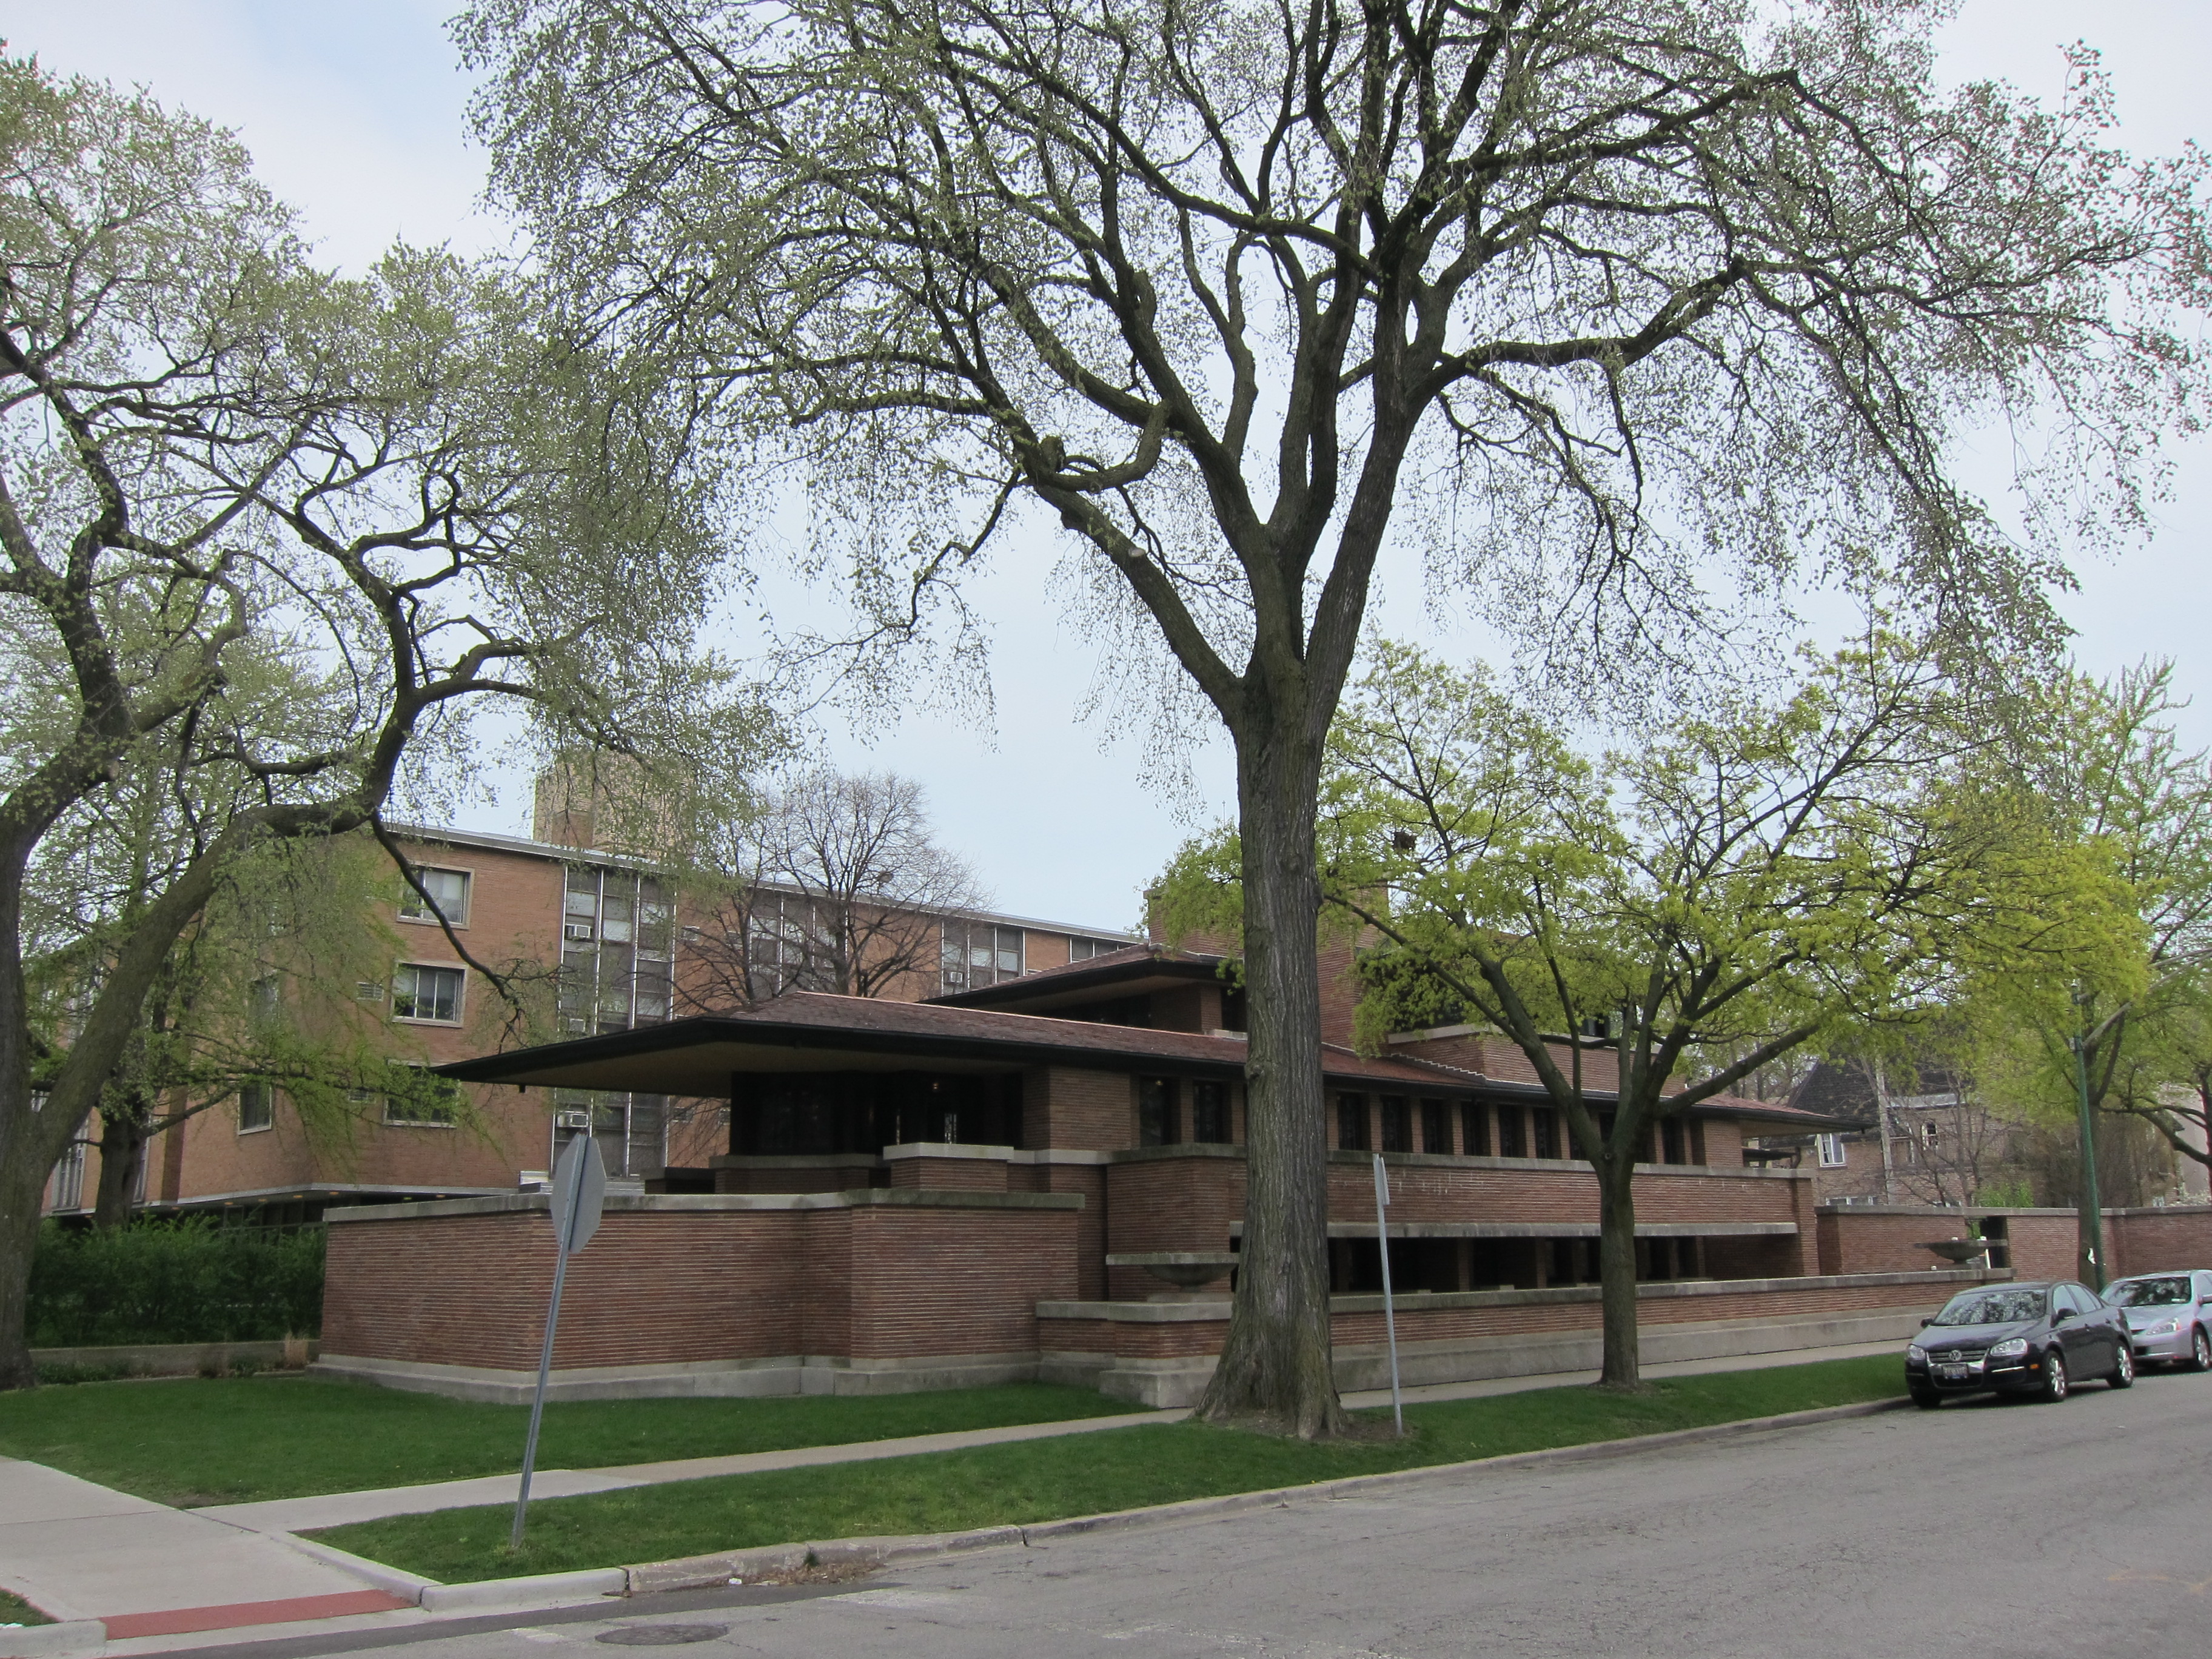 robie house with trees and building | misfits' architecture